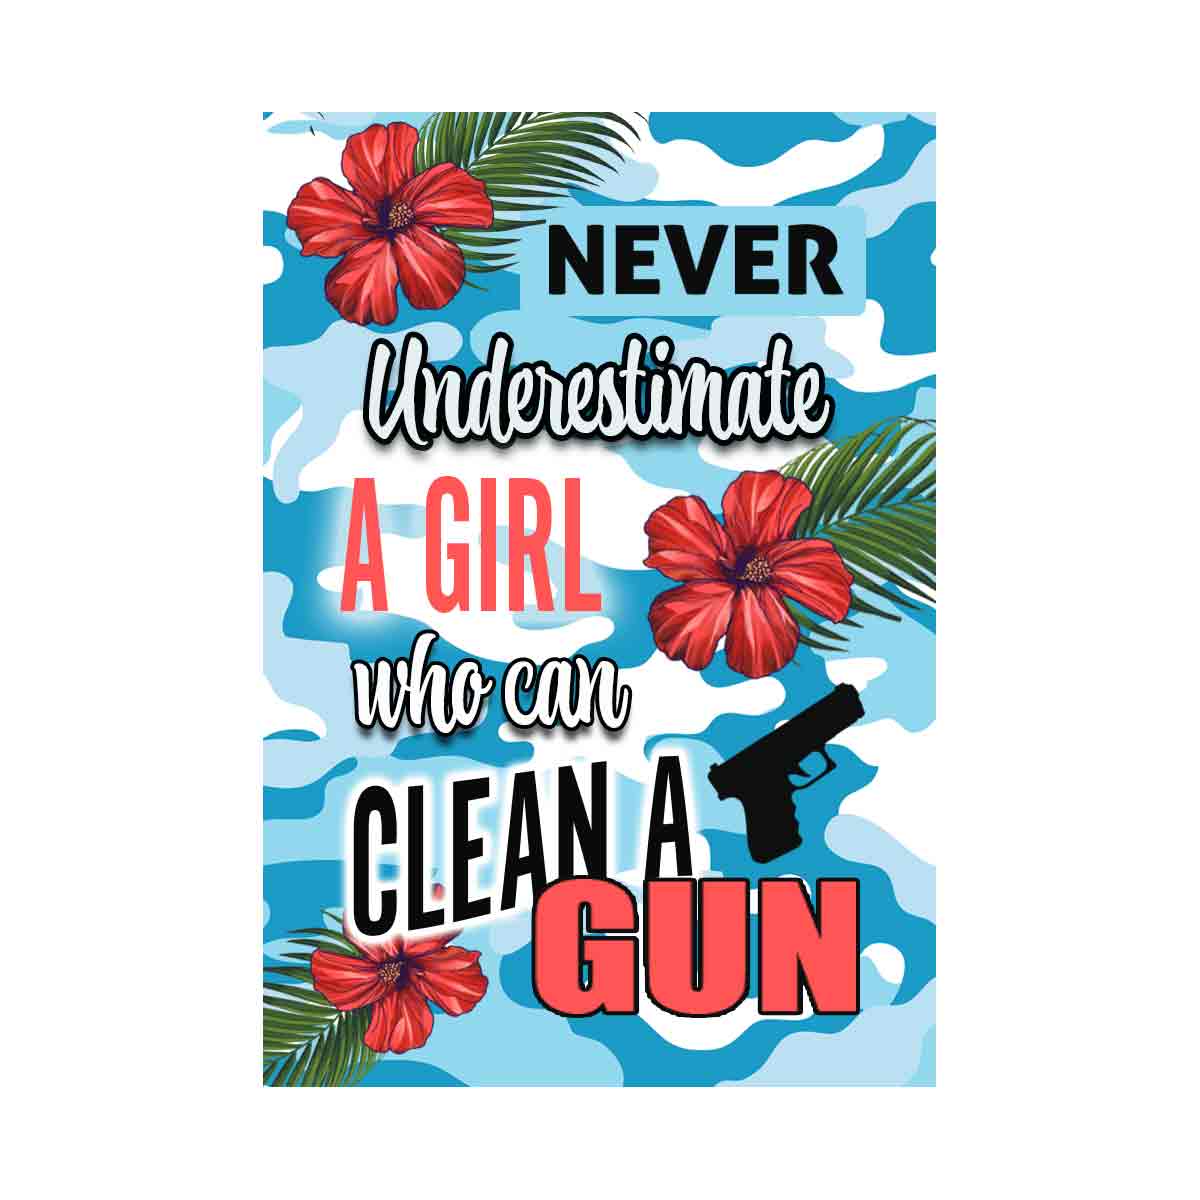 Never underestimate a girl who can clean a gun